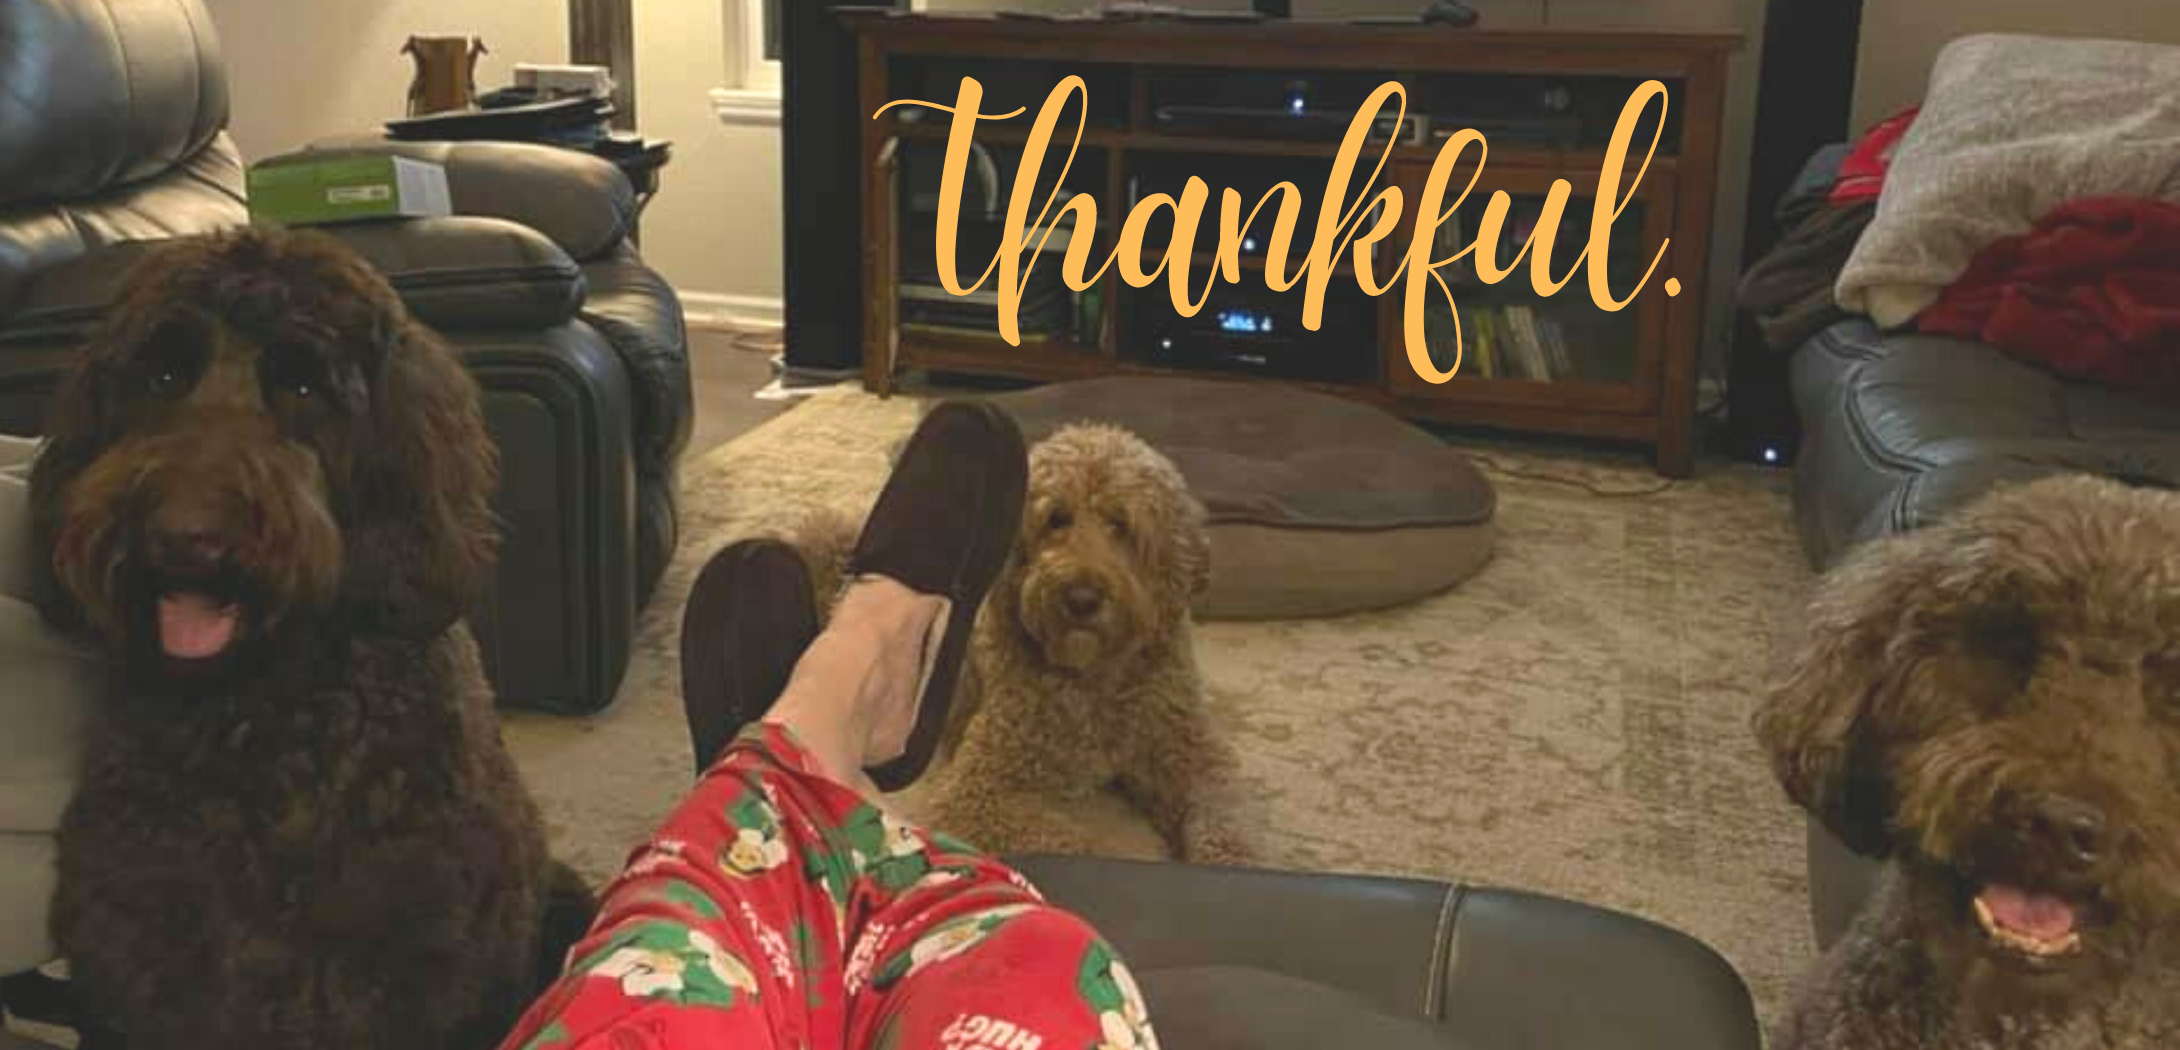 Mark Harrill, President of All American Heating, shares his thoughts on gratitude this Thanksgiving.